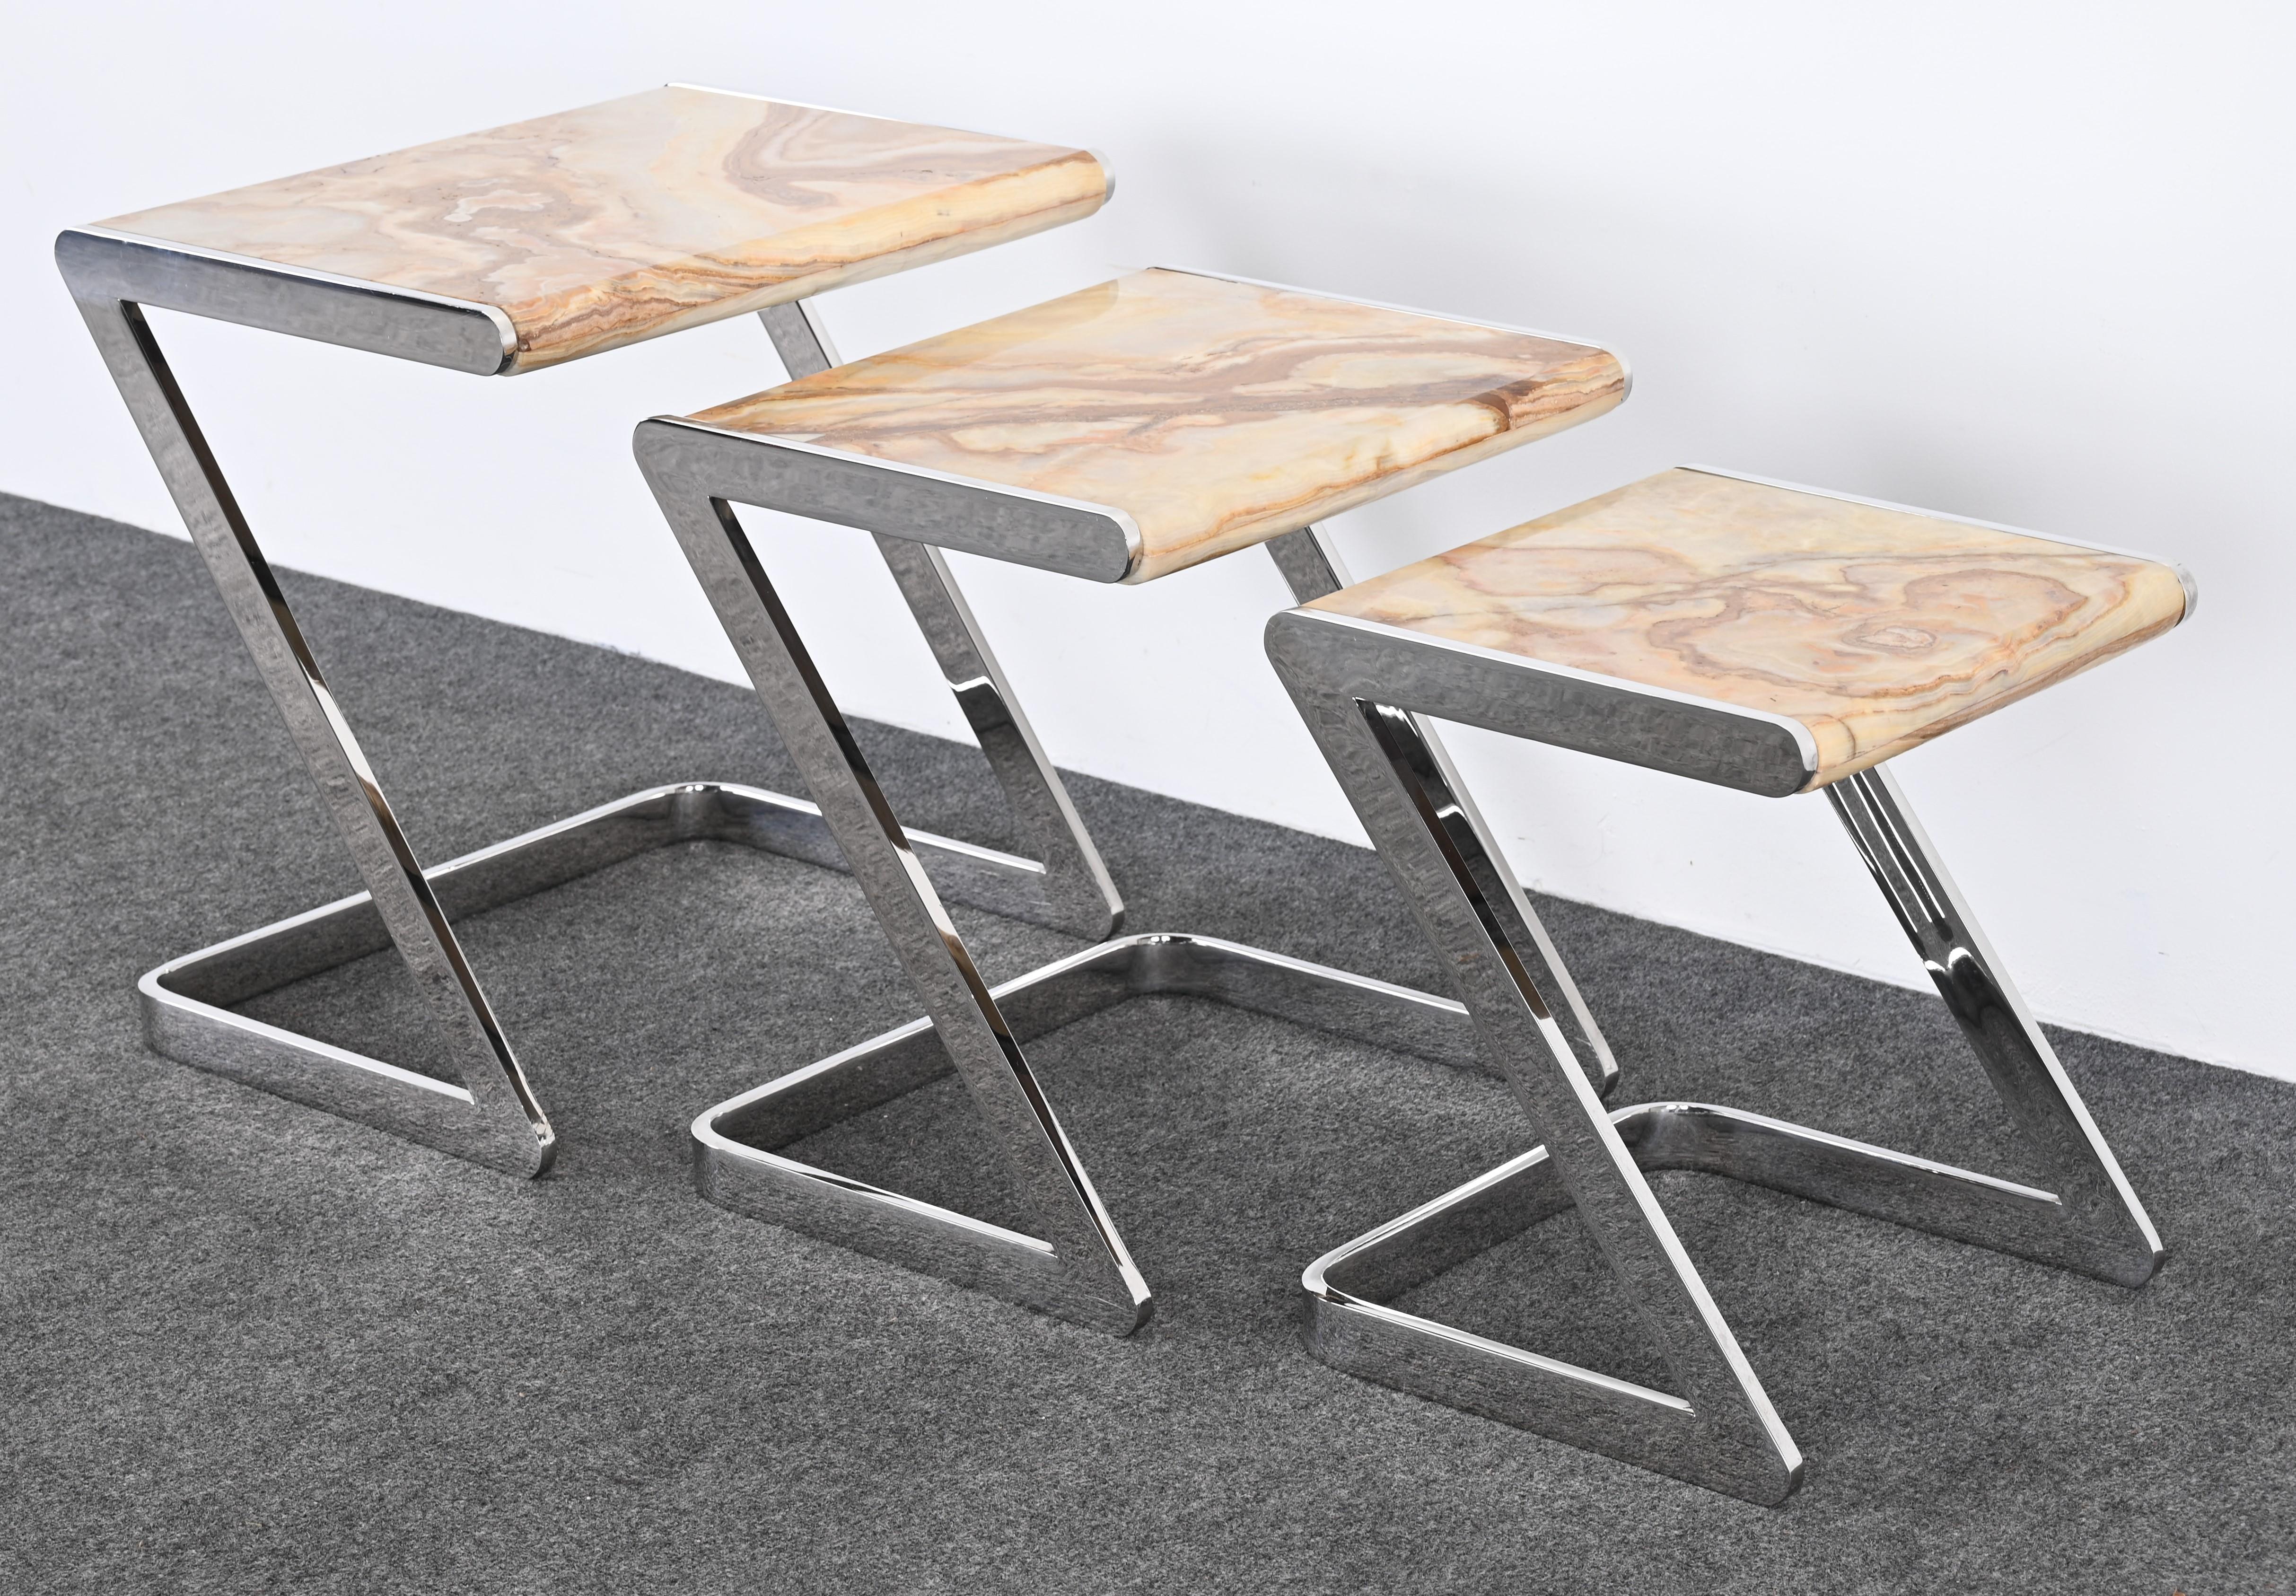 Late 20th Century Onyx and Stainless Steel Nesting Tables by Brueton, 1980s For Sale